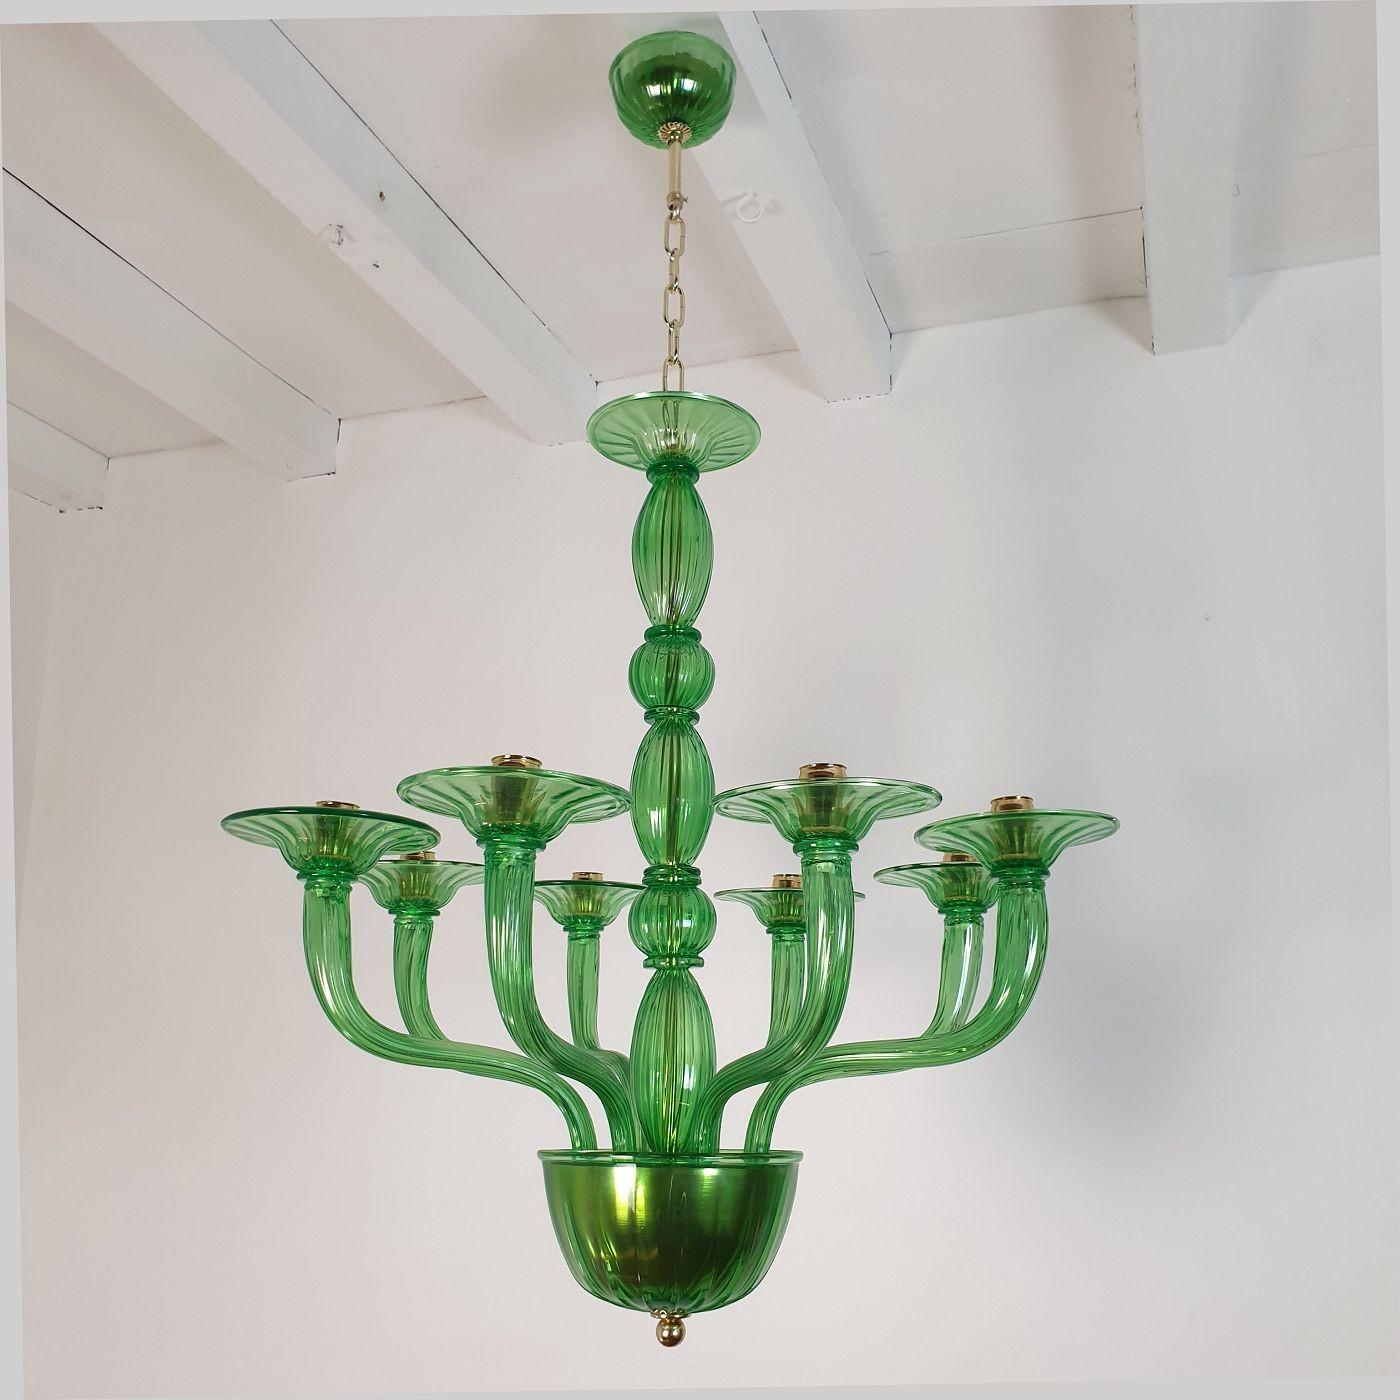 Large Mid Century Modern green Murano glass chandelier, Vistosi style, Italy 1970s.
The vintage Murano glass chandelier has eight lights/arms and is professionally rewired for the US (complimentary European rewiring upon request)
The green